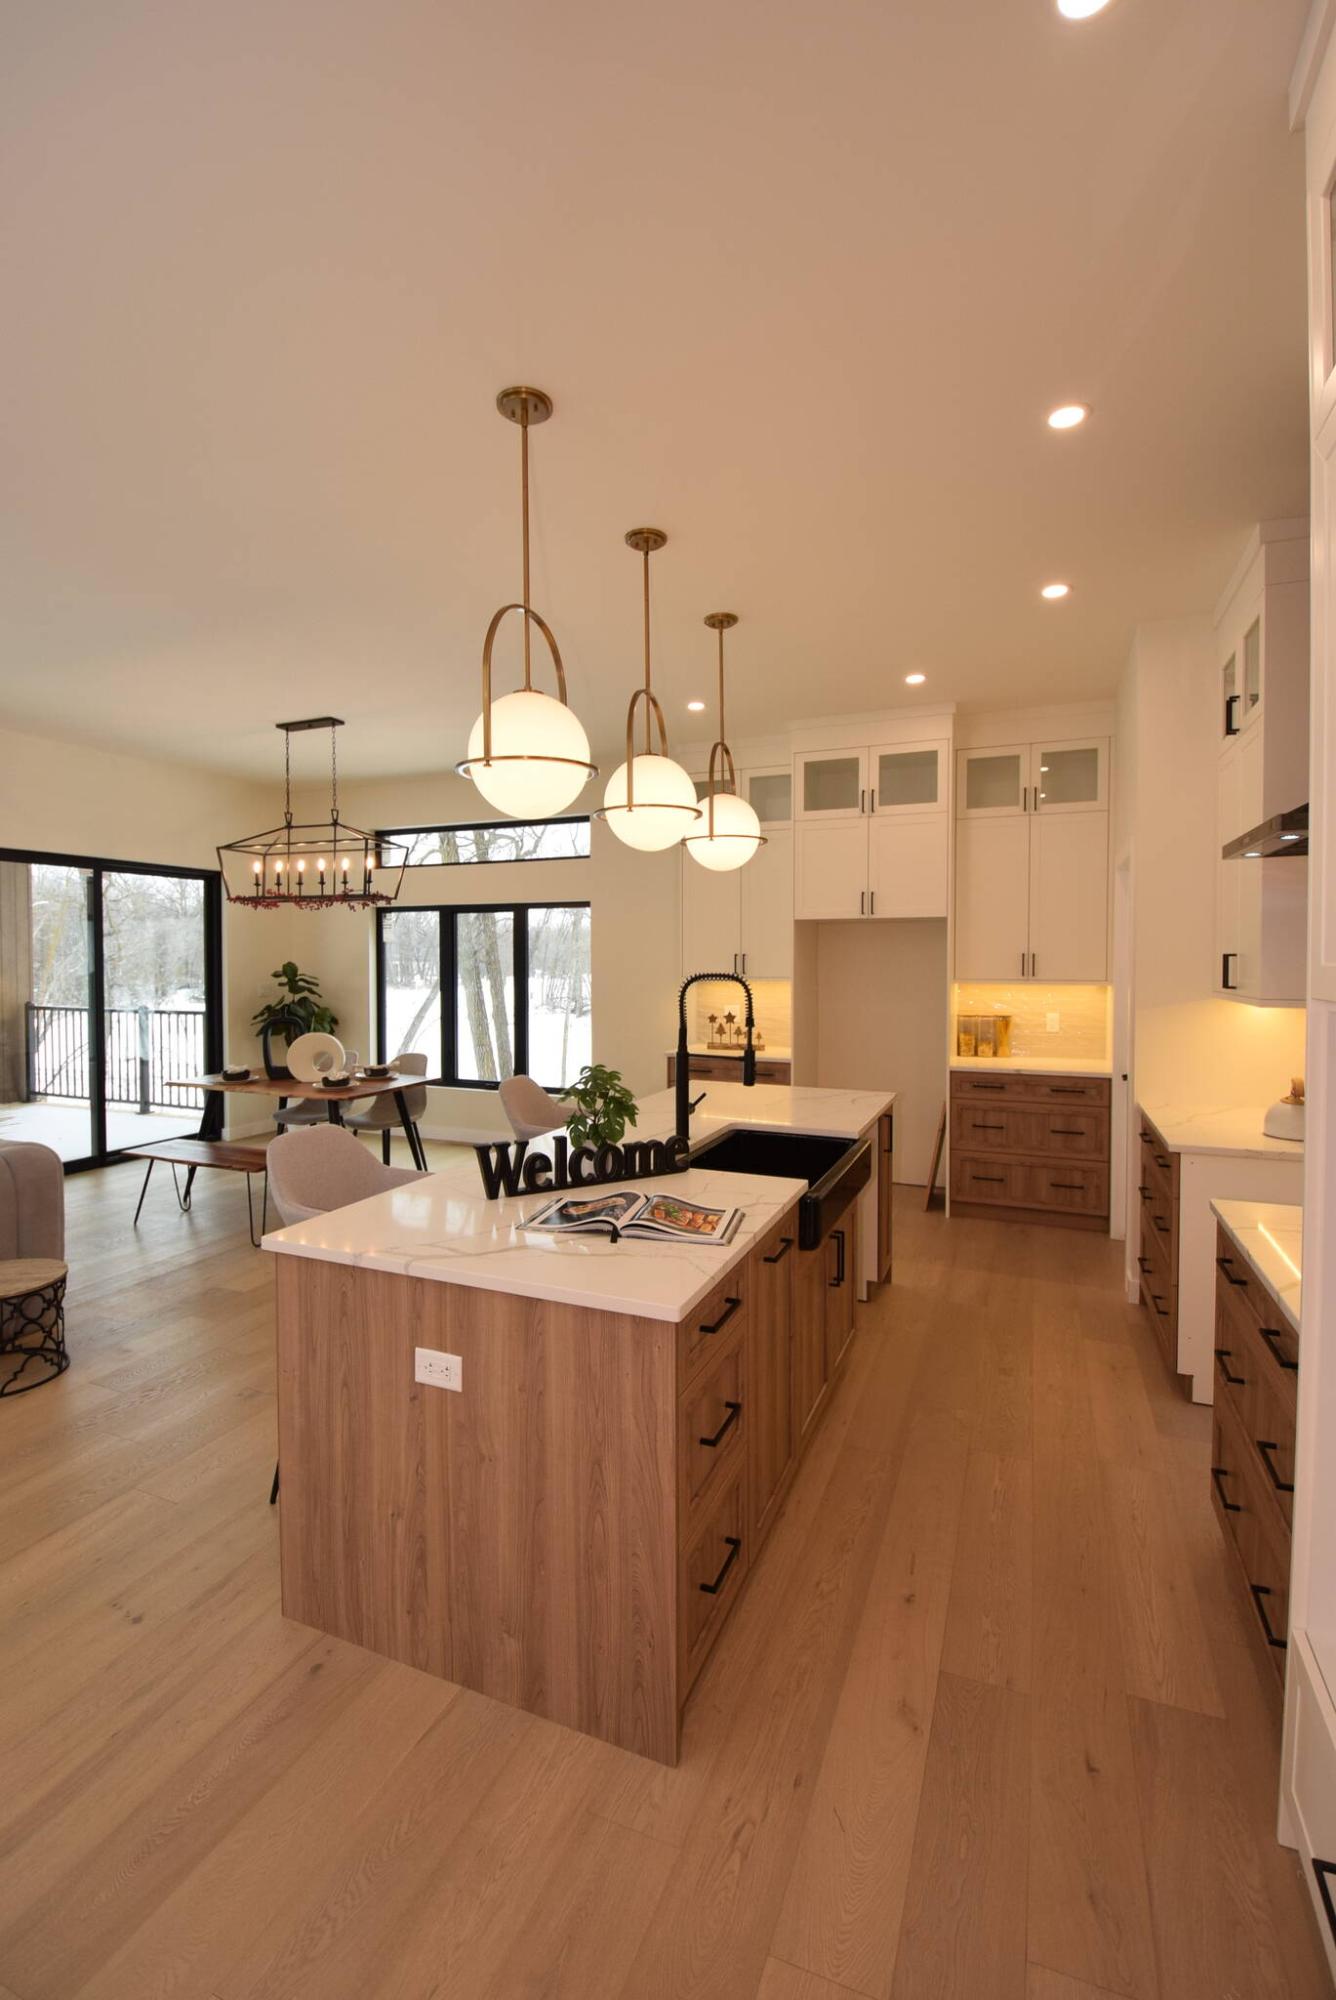  <p>Todd Lewys / Free Press</p>
                                <p>There are more than 130 stunning new homes on display now in the Spring Parade of Homes.</p> 